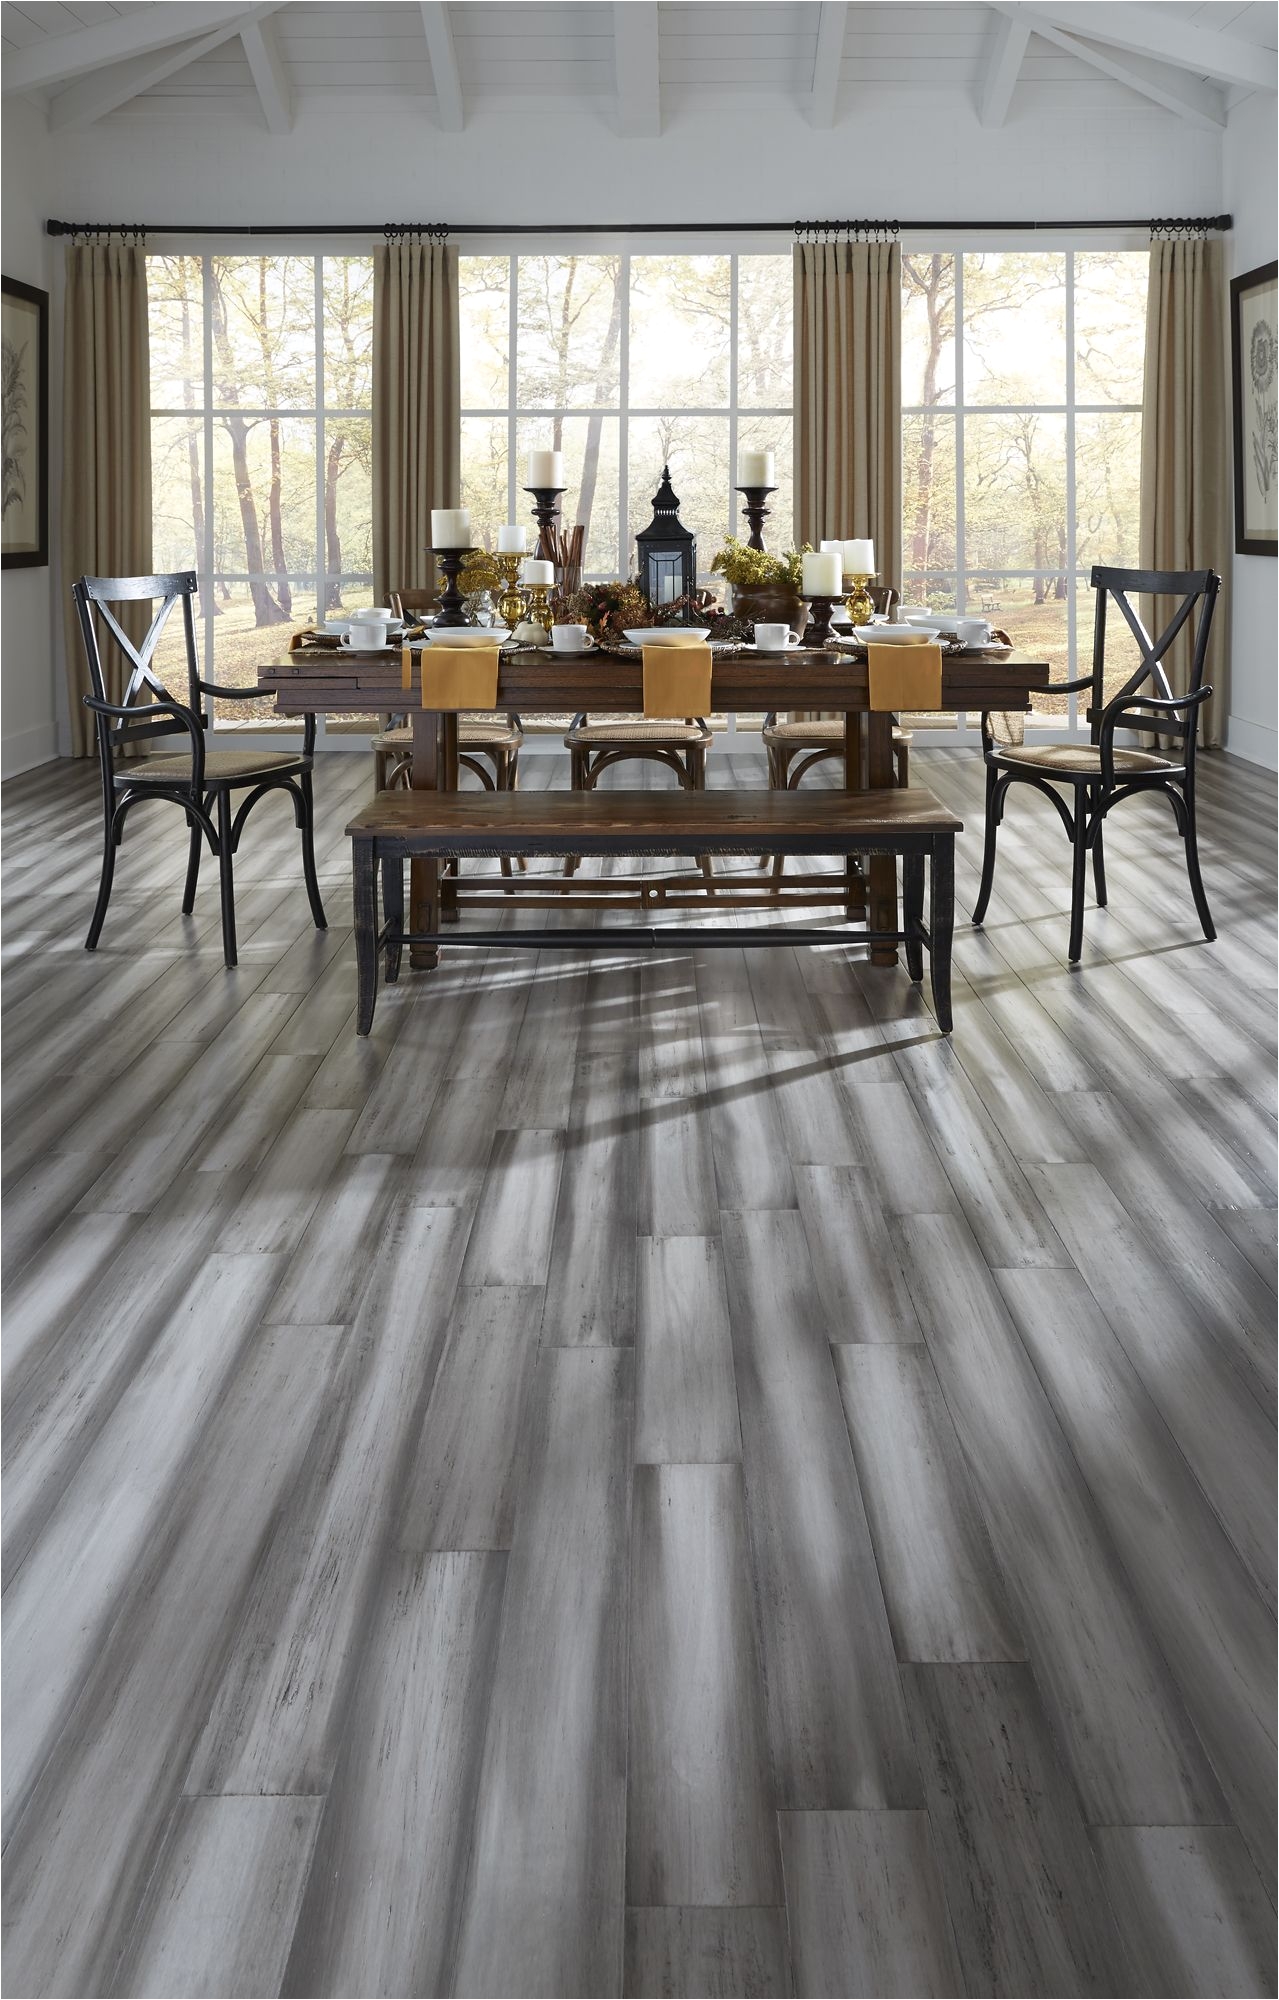 Morning Star Bamboo Flooring Installation Modern Design and Rustic Texture Pair Perfectly with the Stately